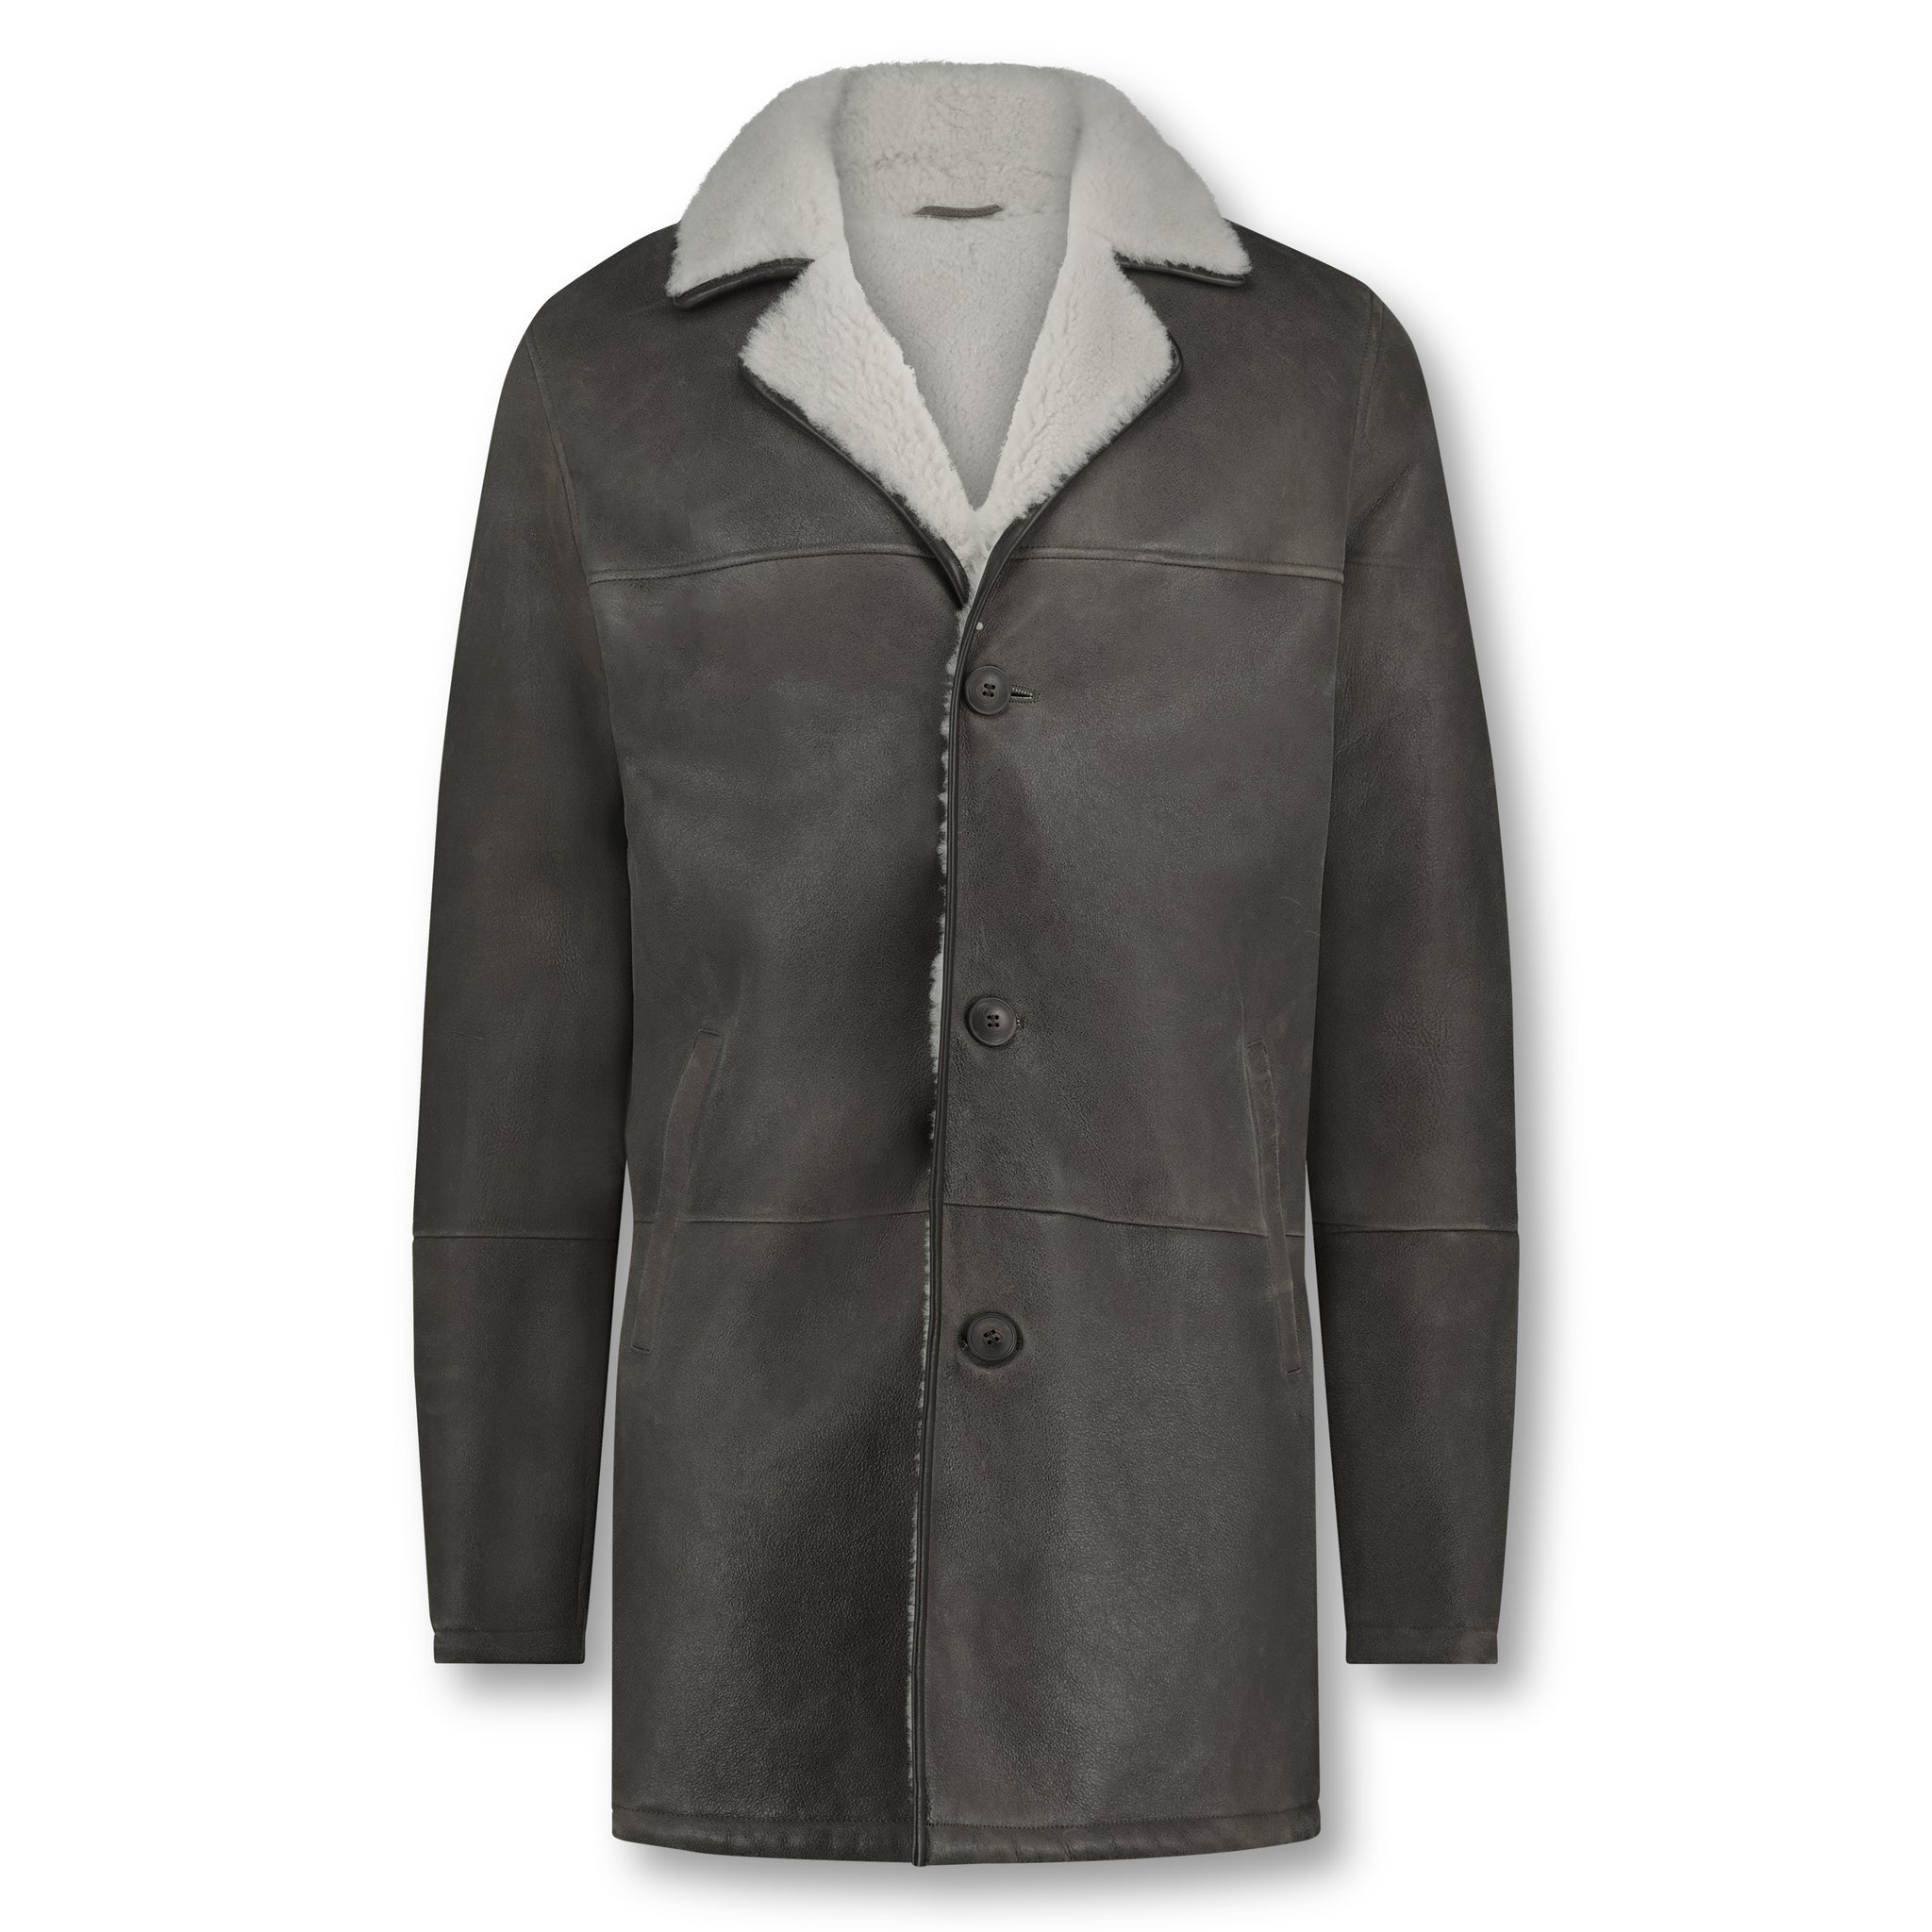 STEFANO | Long leather shearling coat